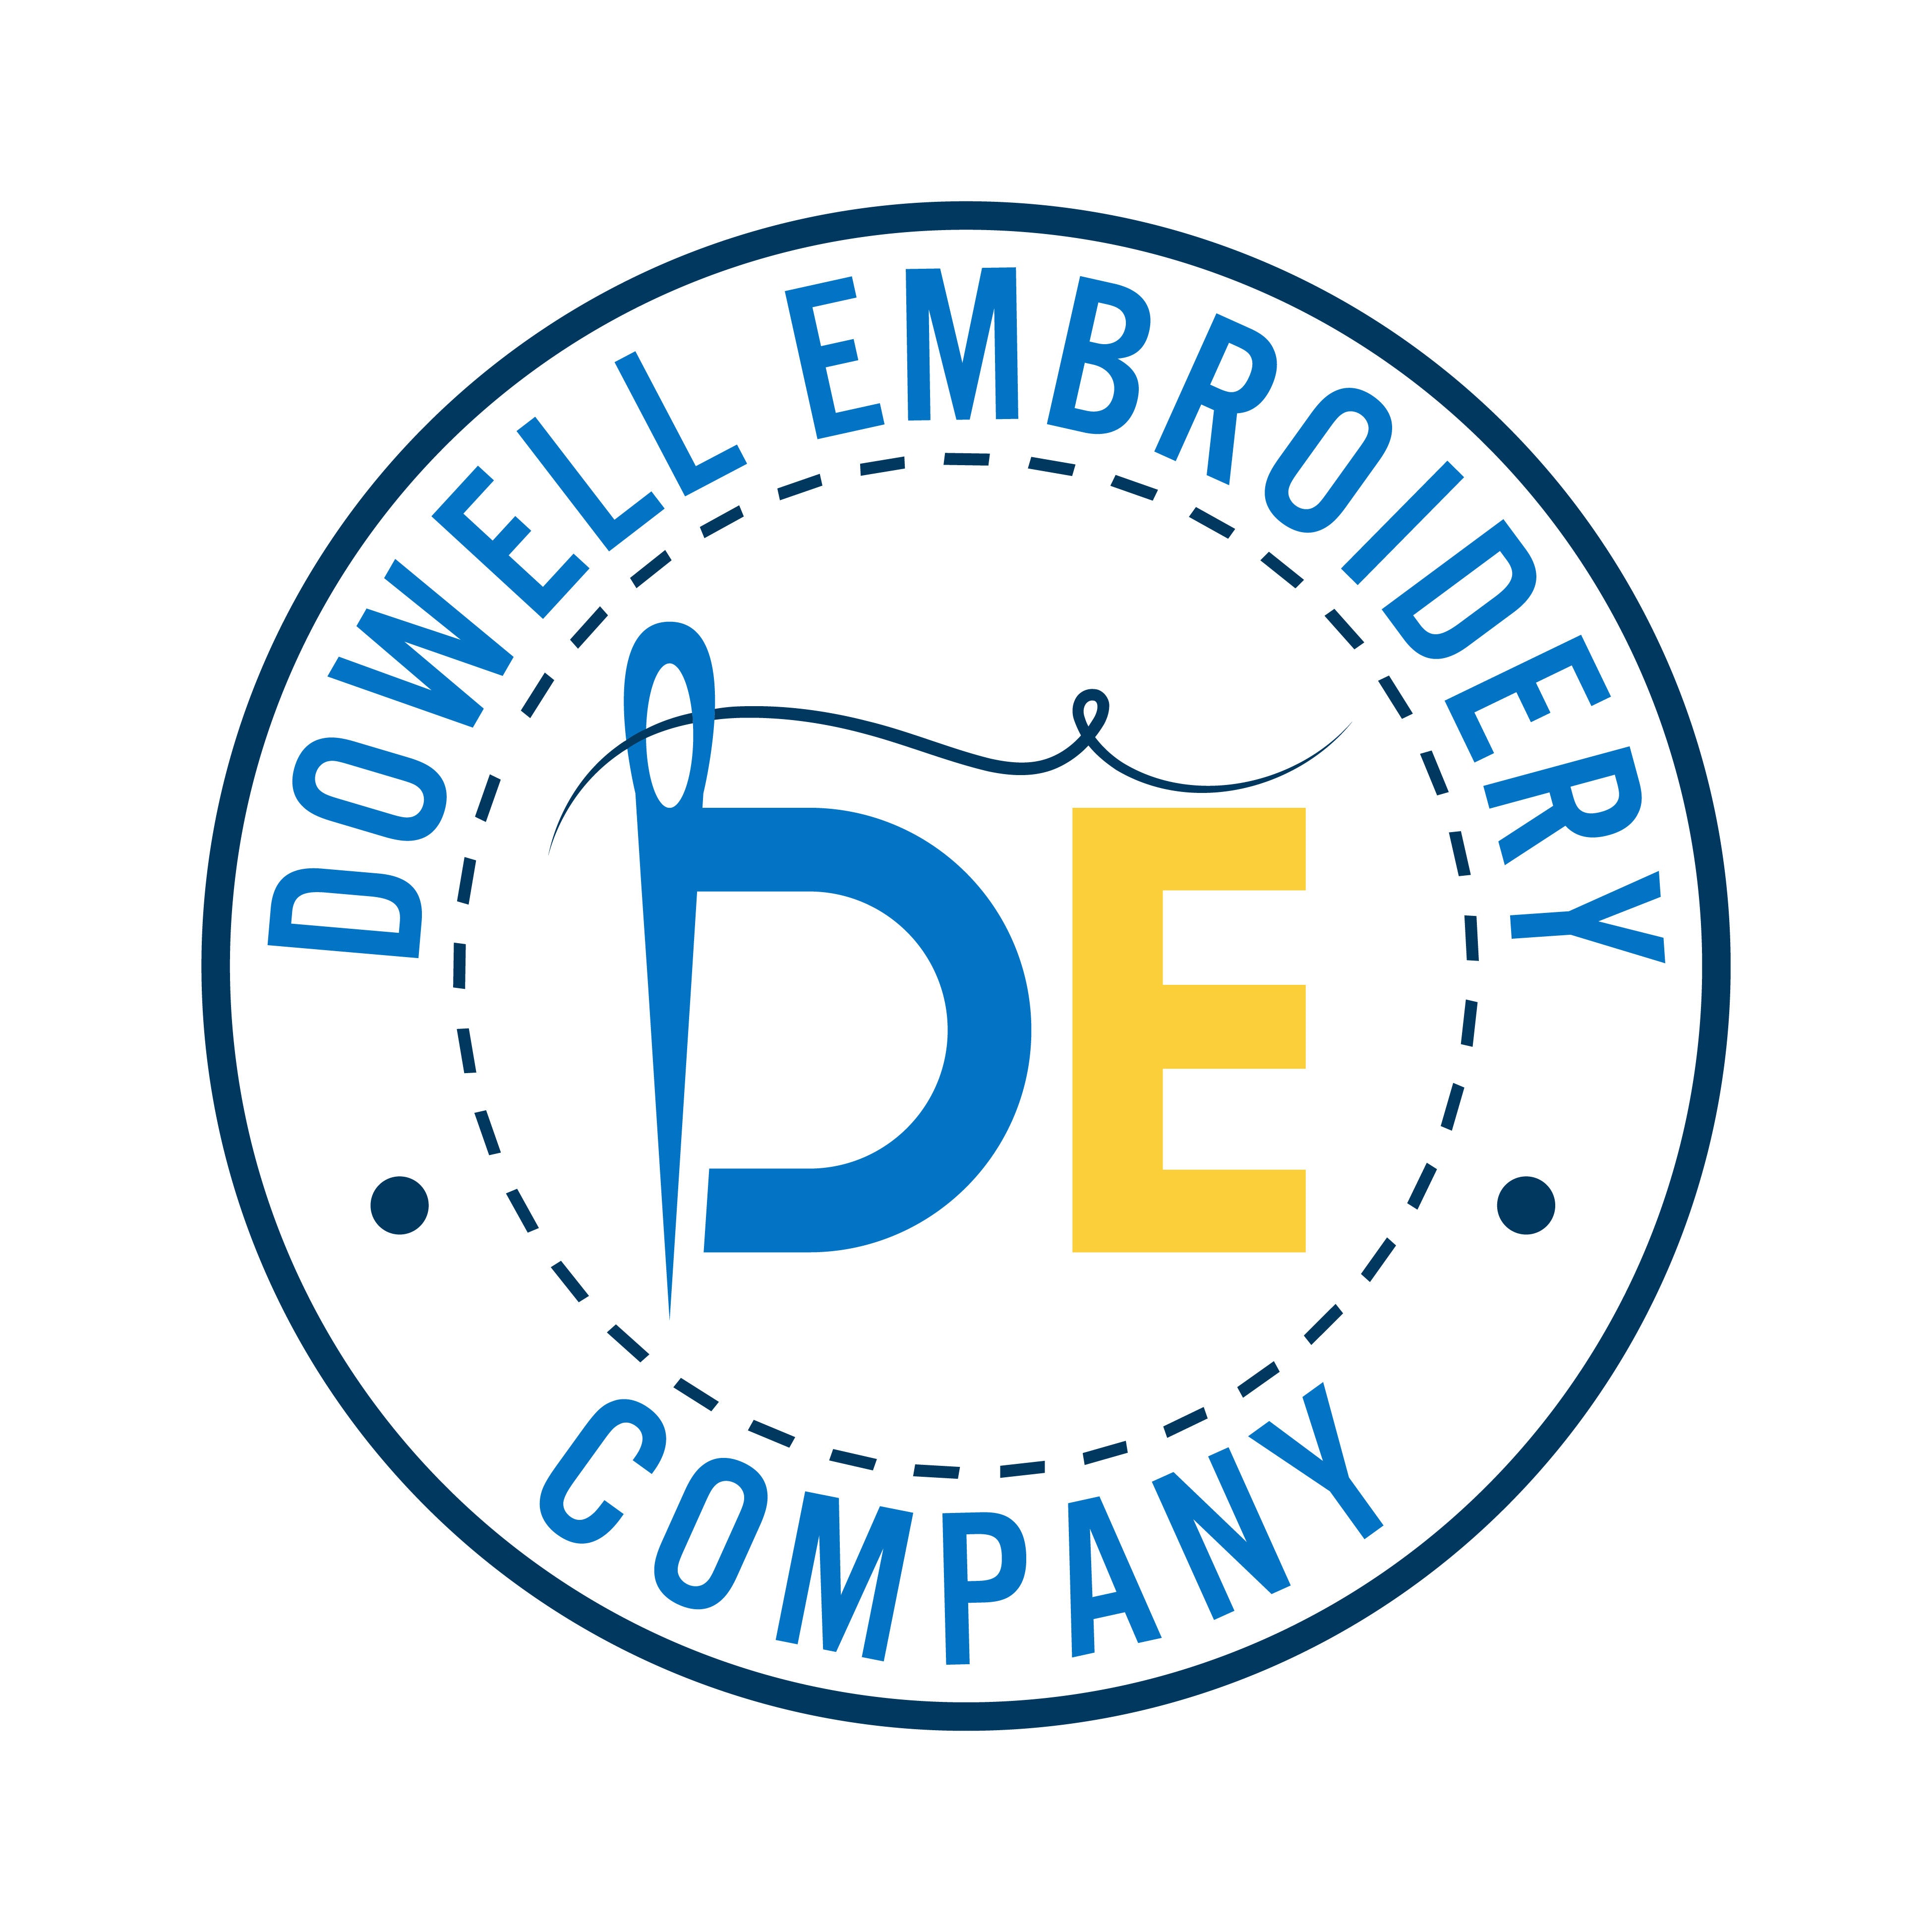 The Dowell Embroidery Company